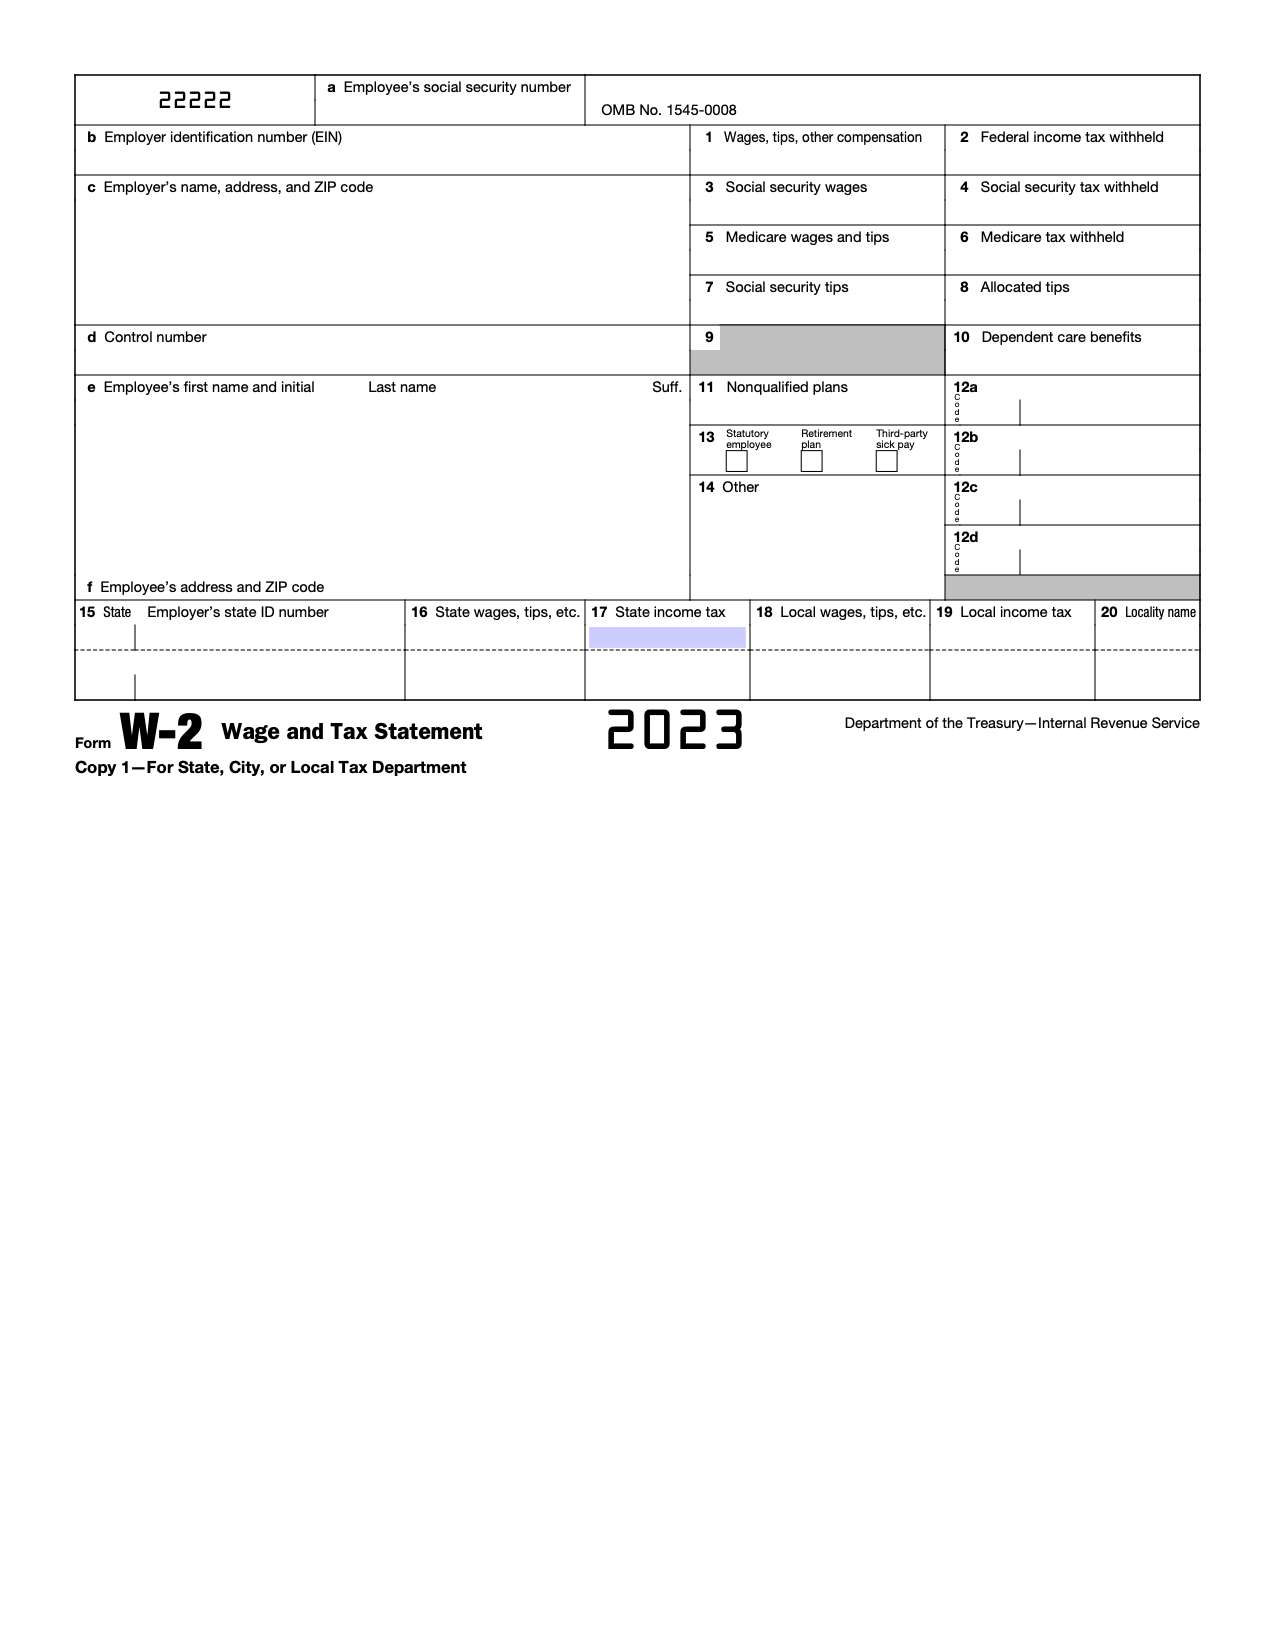 Free Irs Form W-2 | Wage And Tax Statement - Pdf – Eforms throughout W2 Form 2022 Pdf Printable